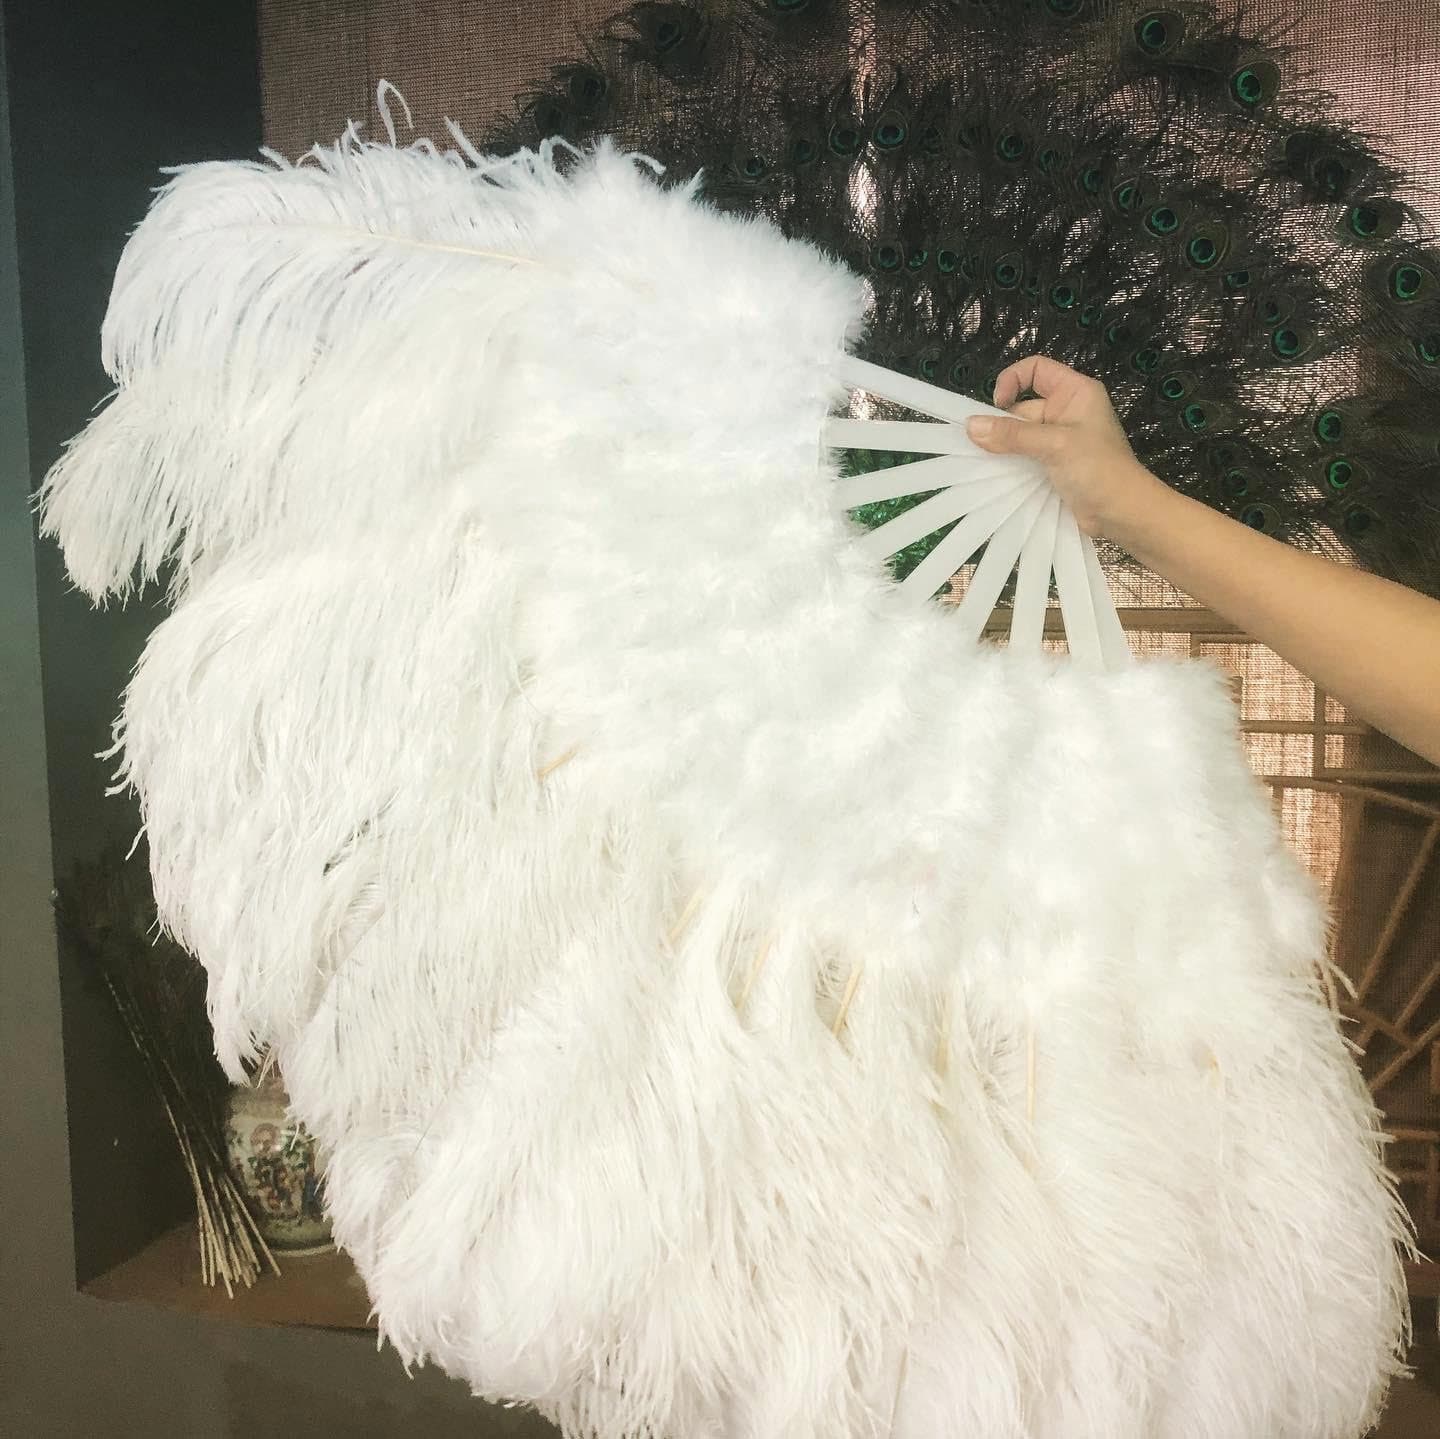 hotfans White Ostrich & Marabou Feathers Fan 27x 53 with Travel Leather Bag for A Pair